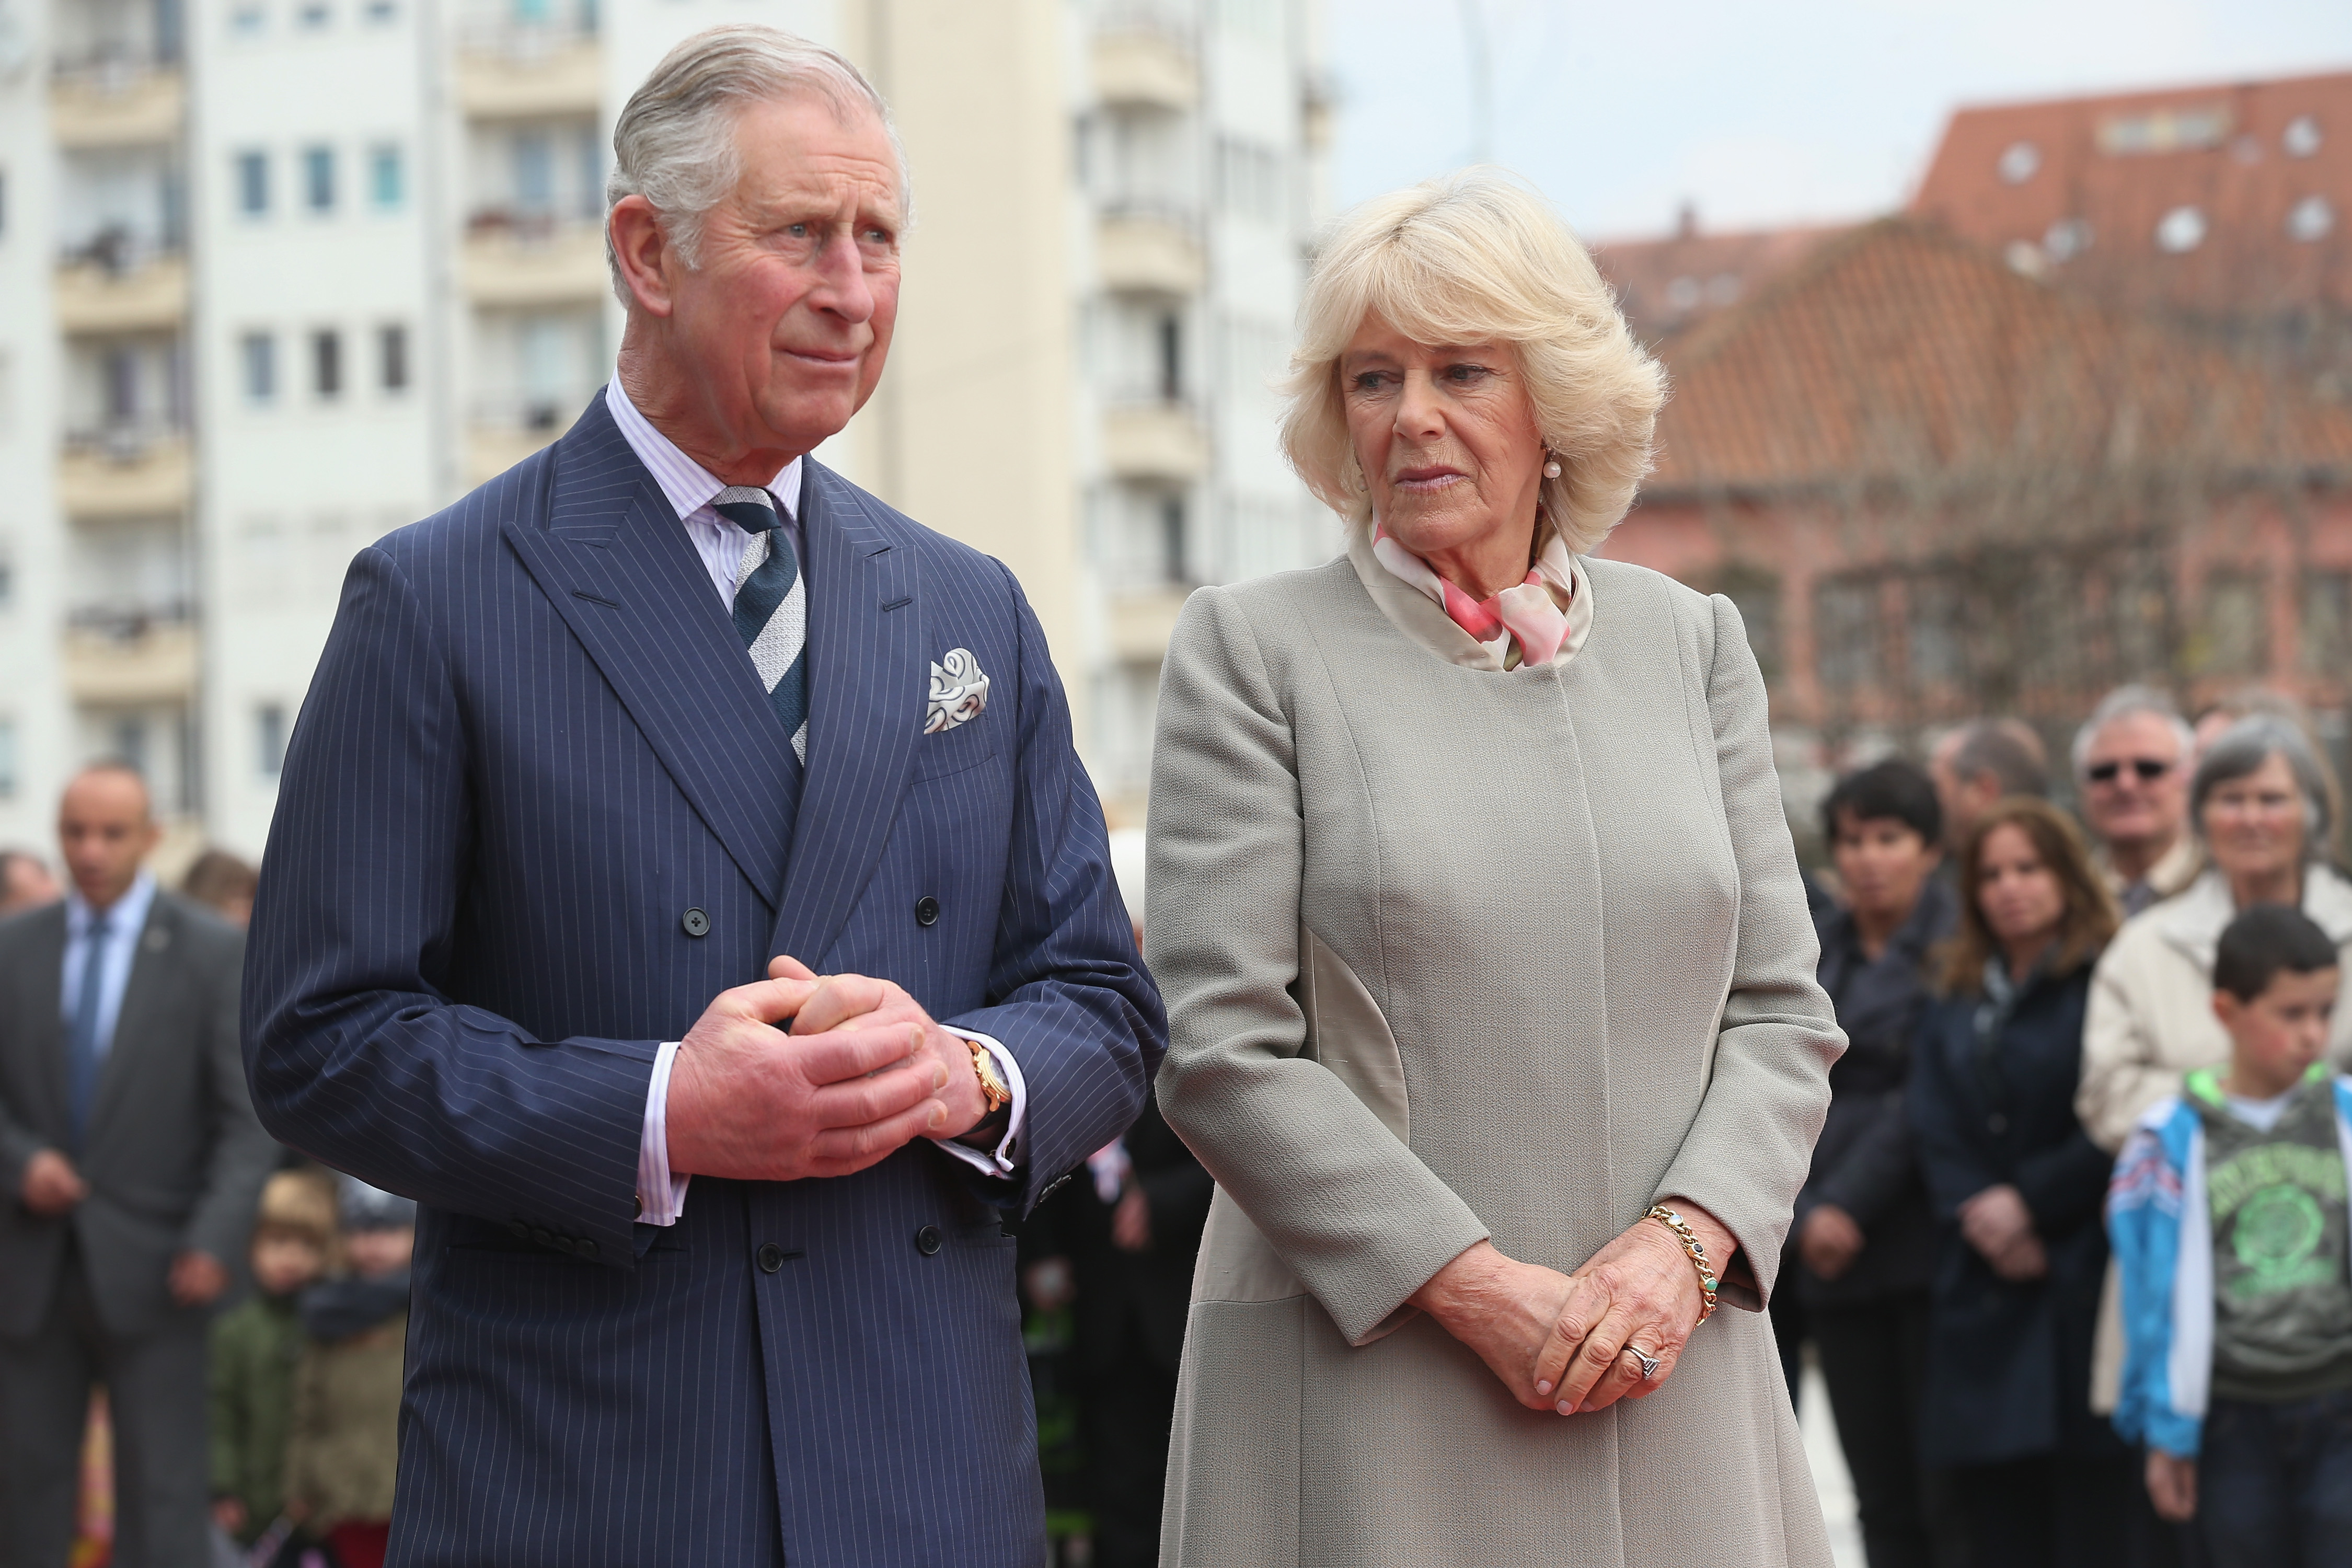 Prince Charles and Camilla Parker Bowles attend a ceremony at a memorial to people still missing from the 1999 Kosovo War